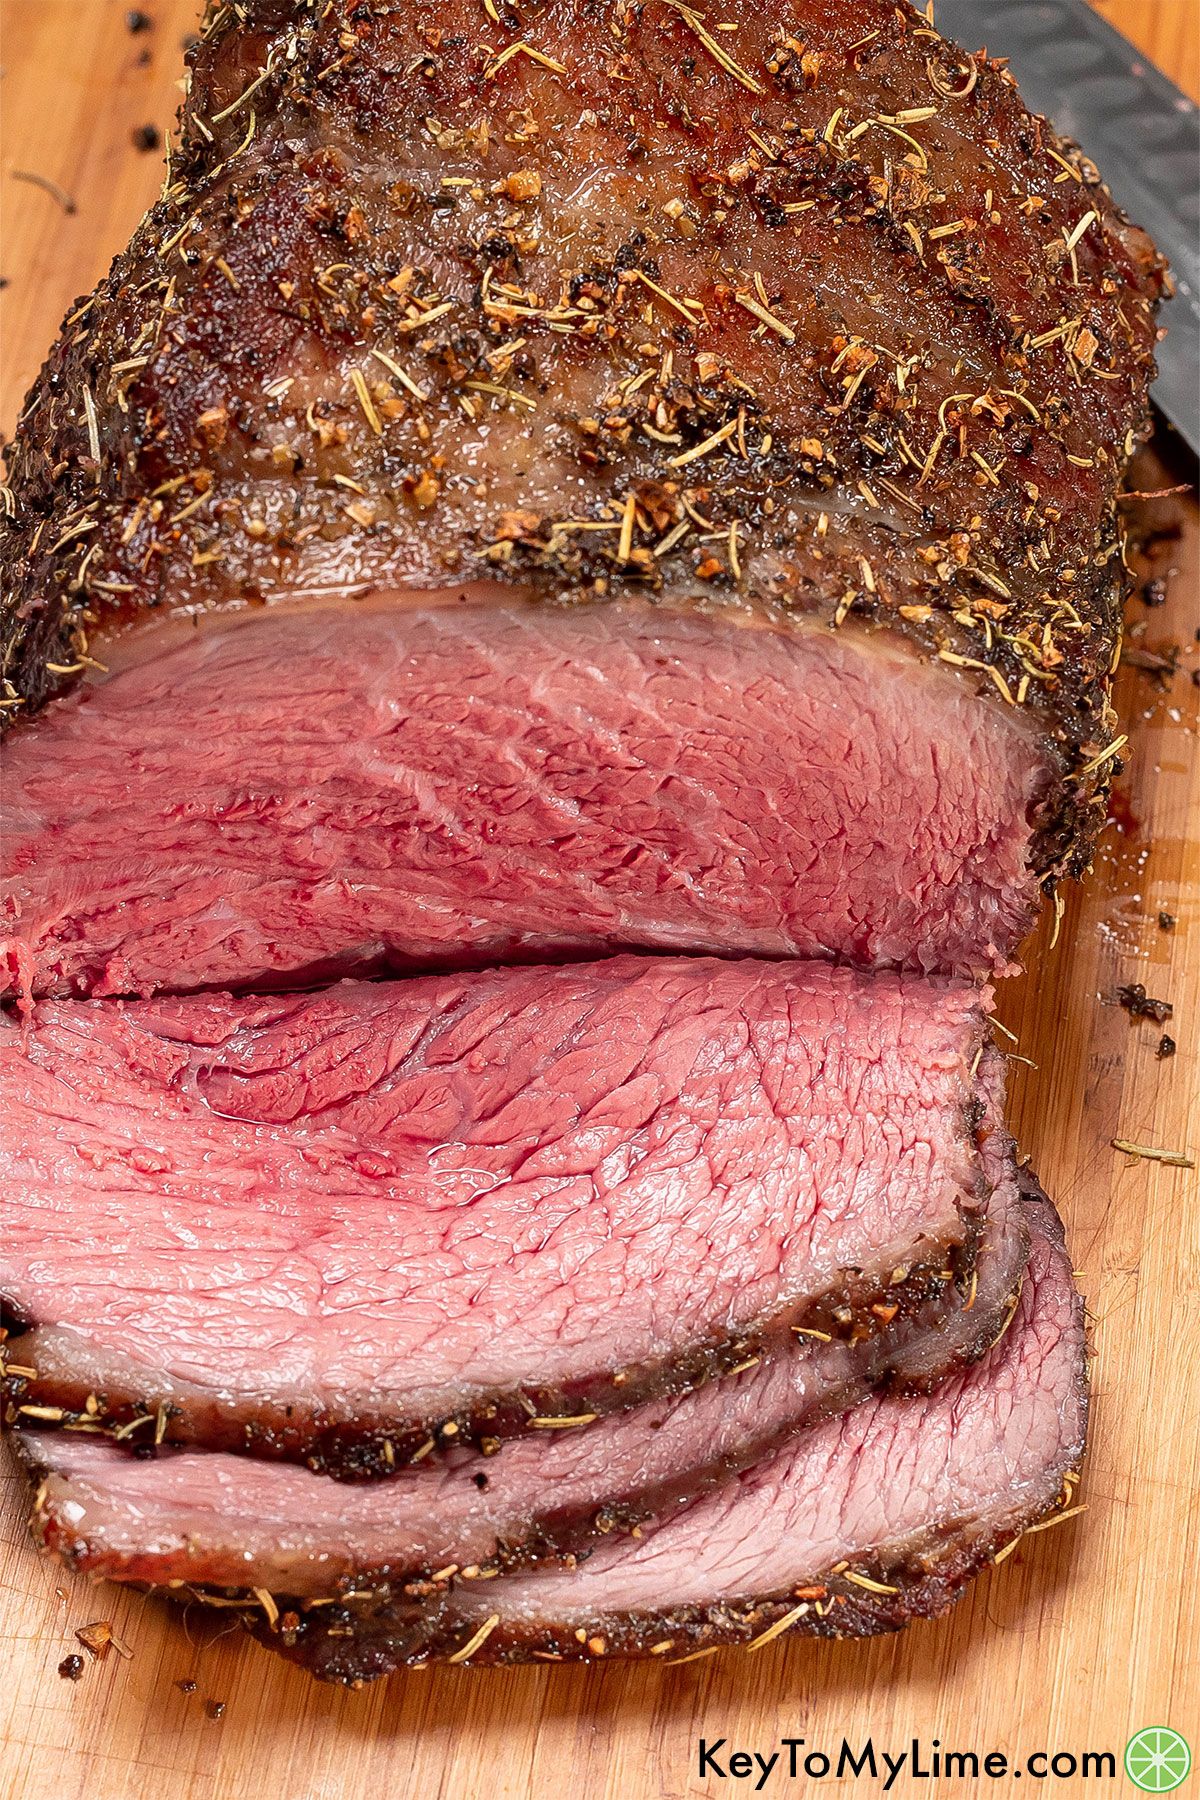 A cooked roast covered in a beautiful rub with a few slices cut on a cutting board showing the juicy tender slices.